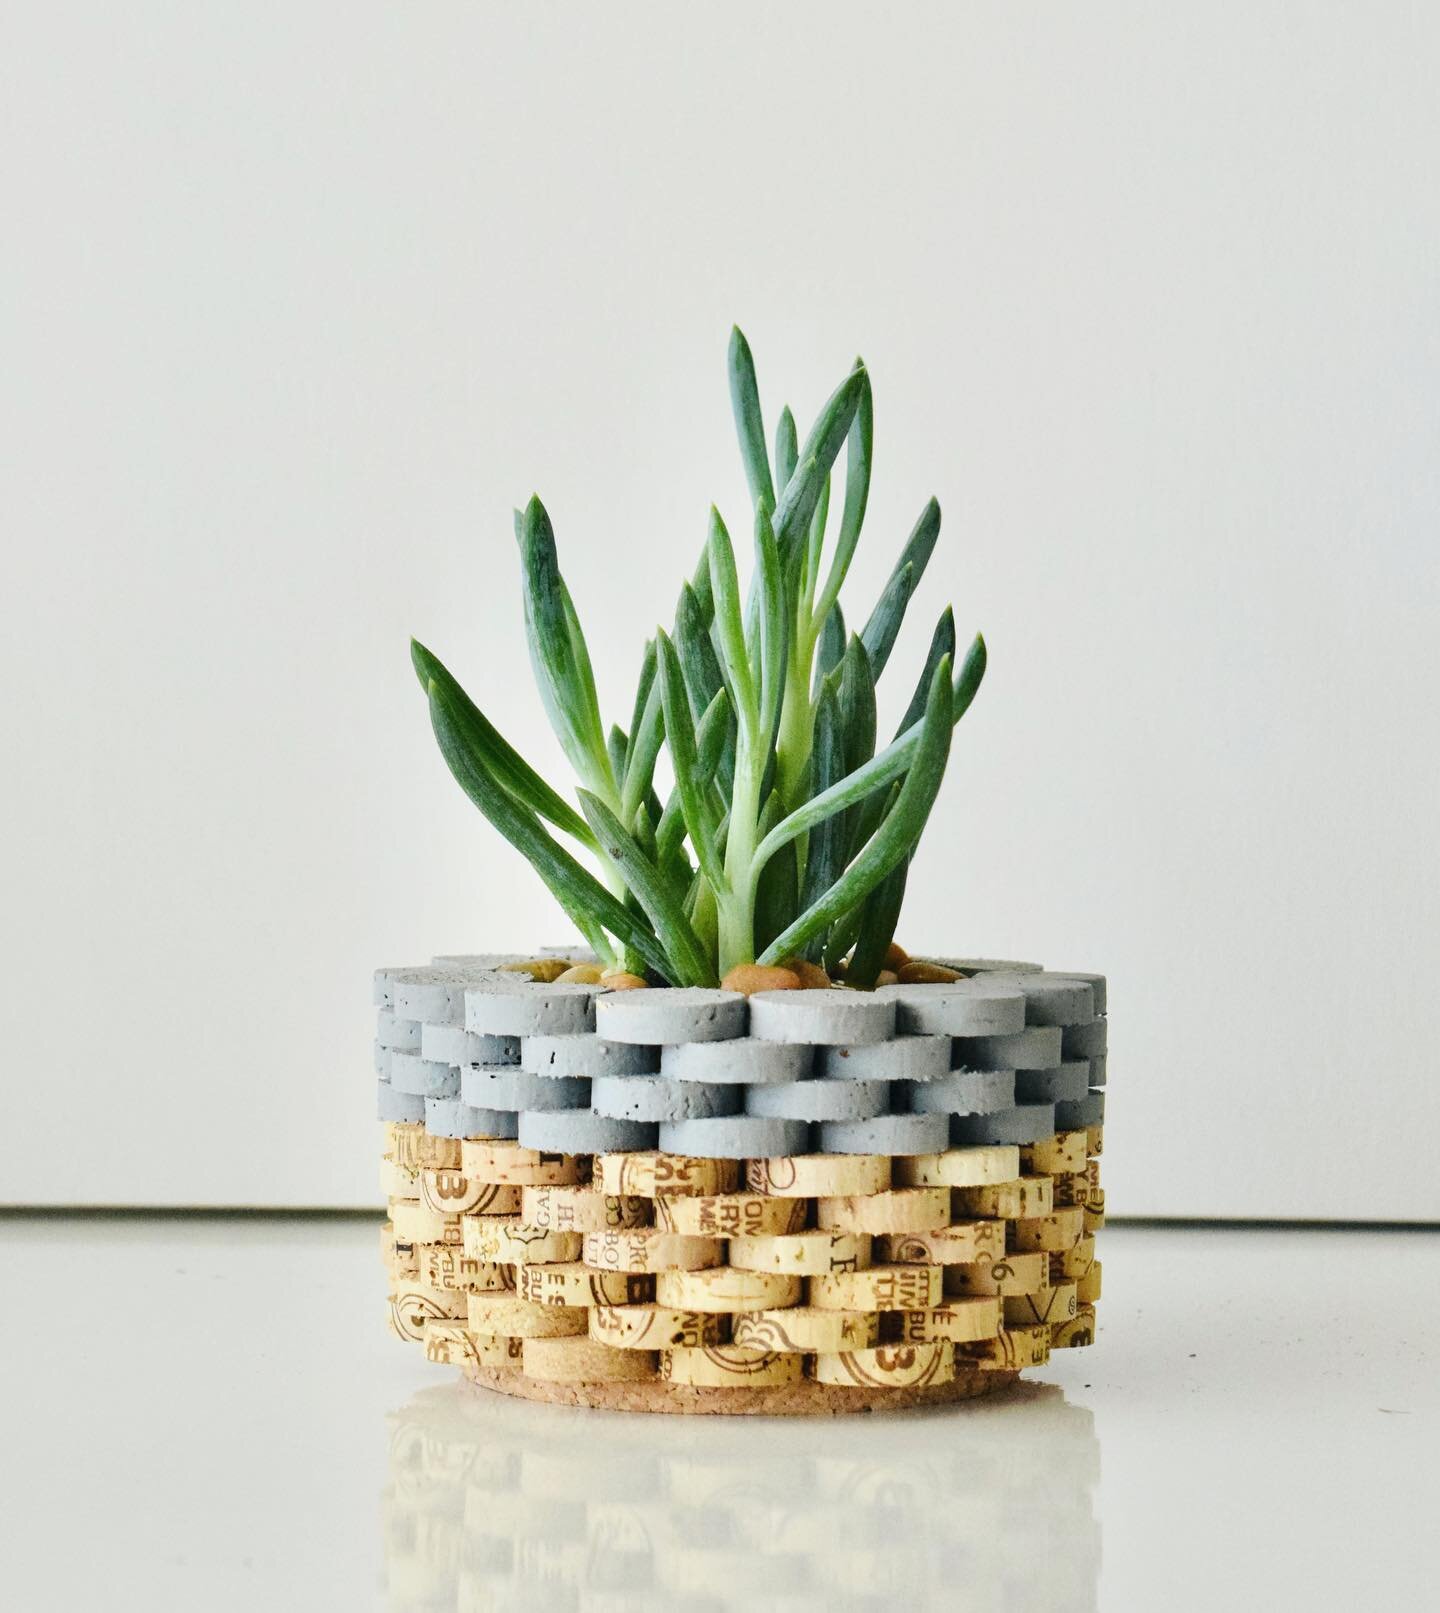 Can&rsquo;t wait for the warmer weather and outdoor markets to bring these handsomes back out. 
.
.
.
.
.
#corkplanter #planter #sustainable #eco #upcycle #minimalism #modern #design #plants